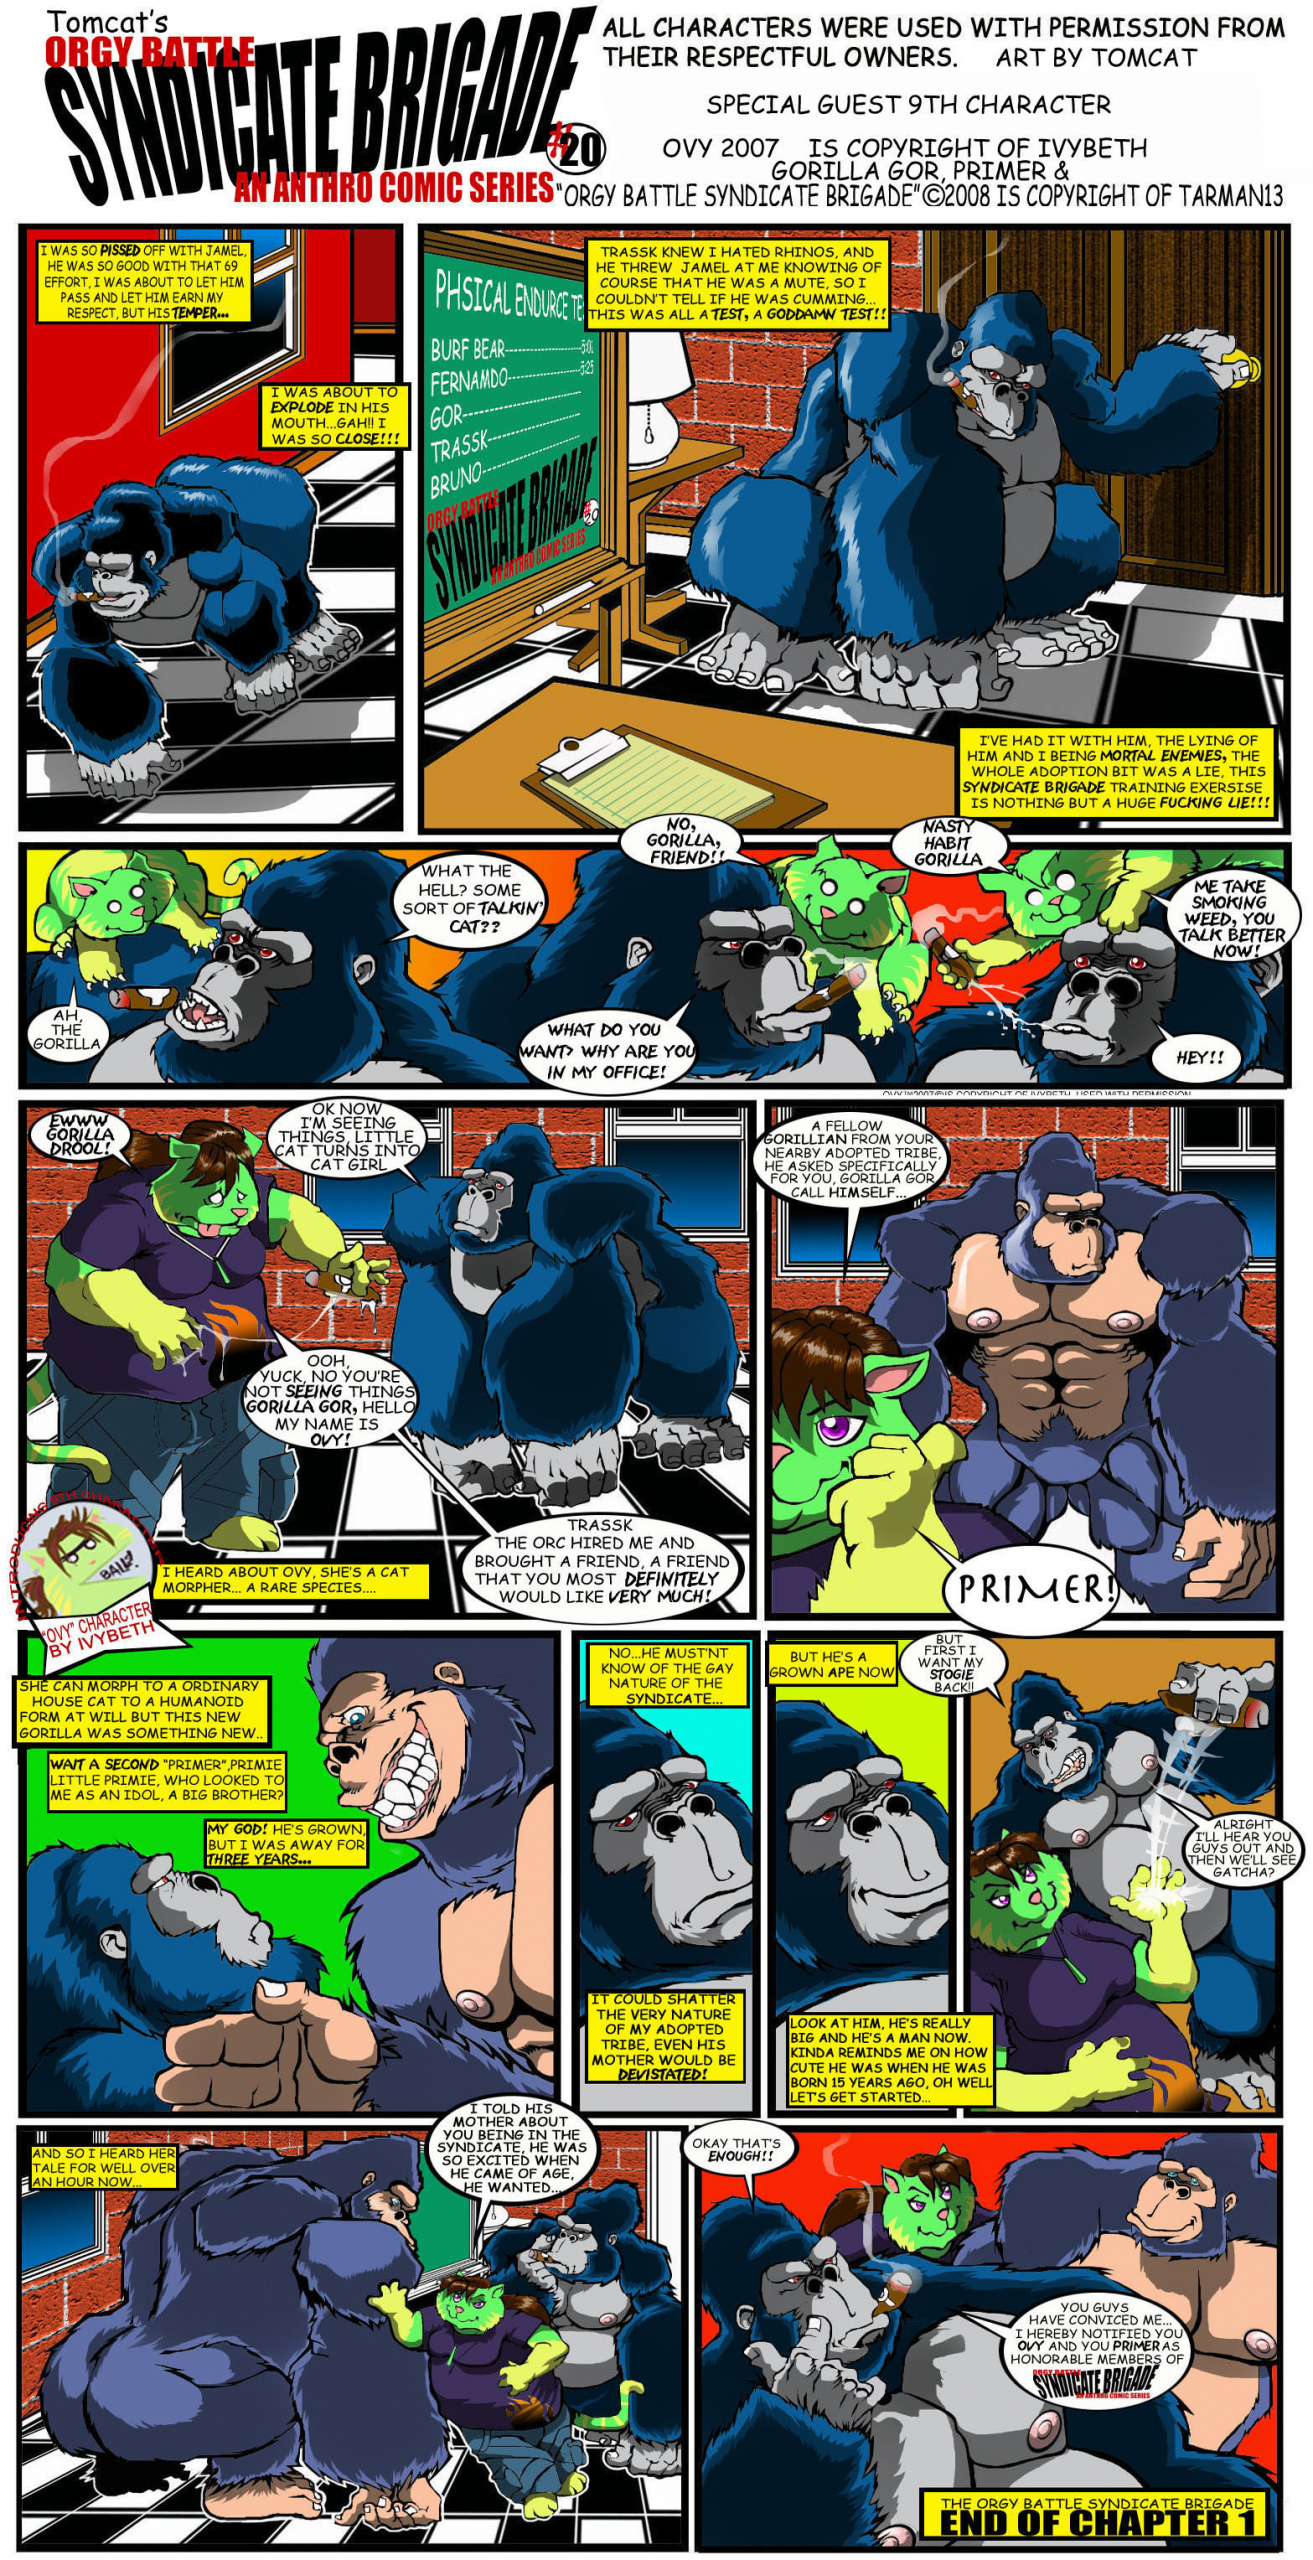 168214_Tomcat_syndicate_comic_page_20